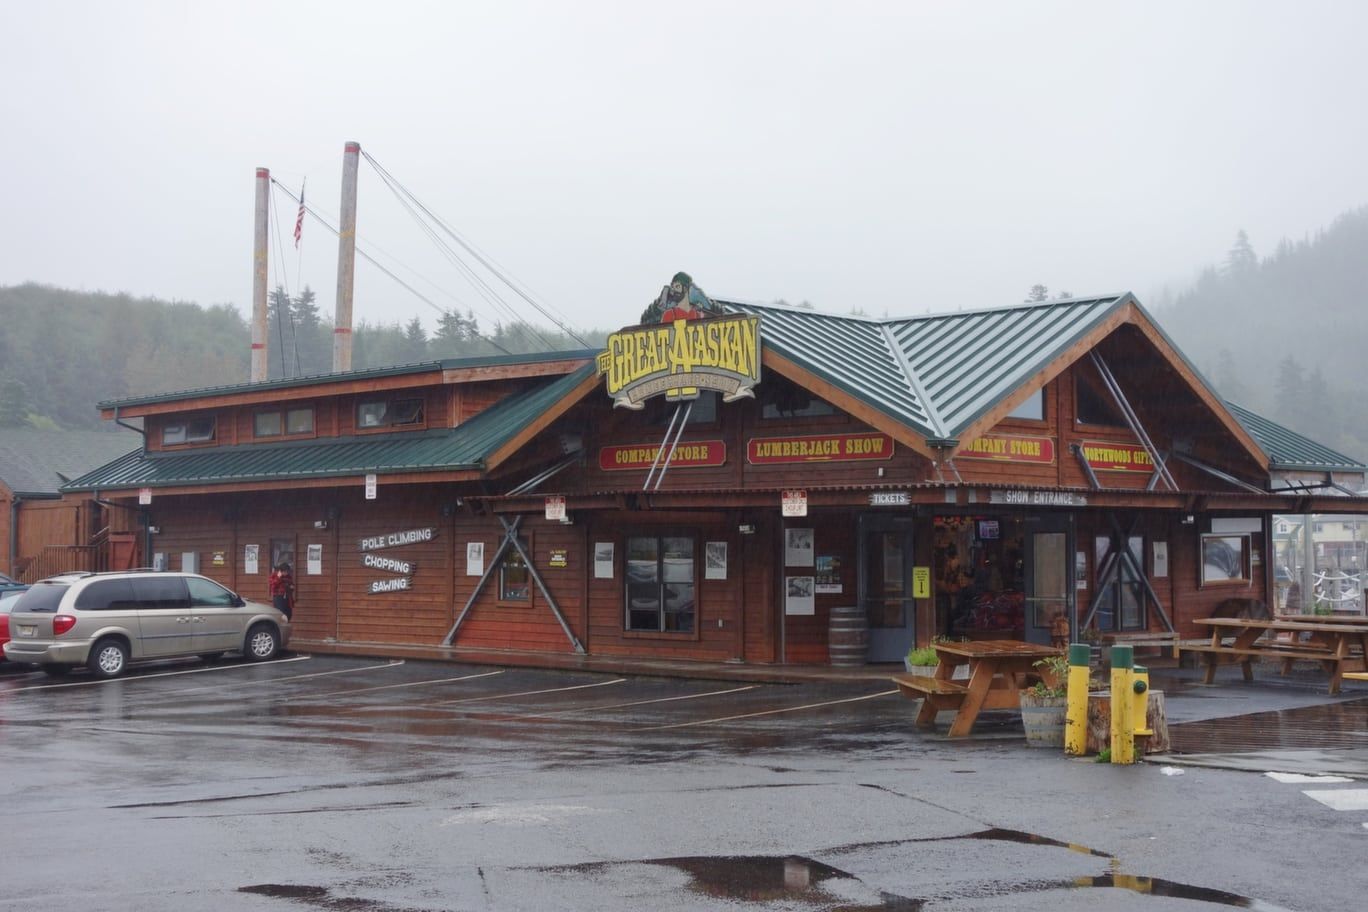 Top Things to do in Ketchikan Alaska on a Cruise